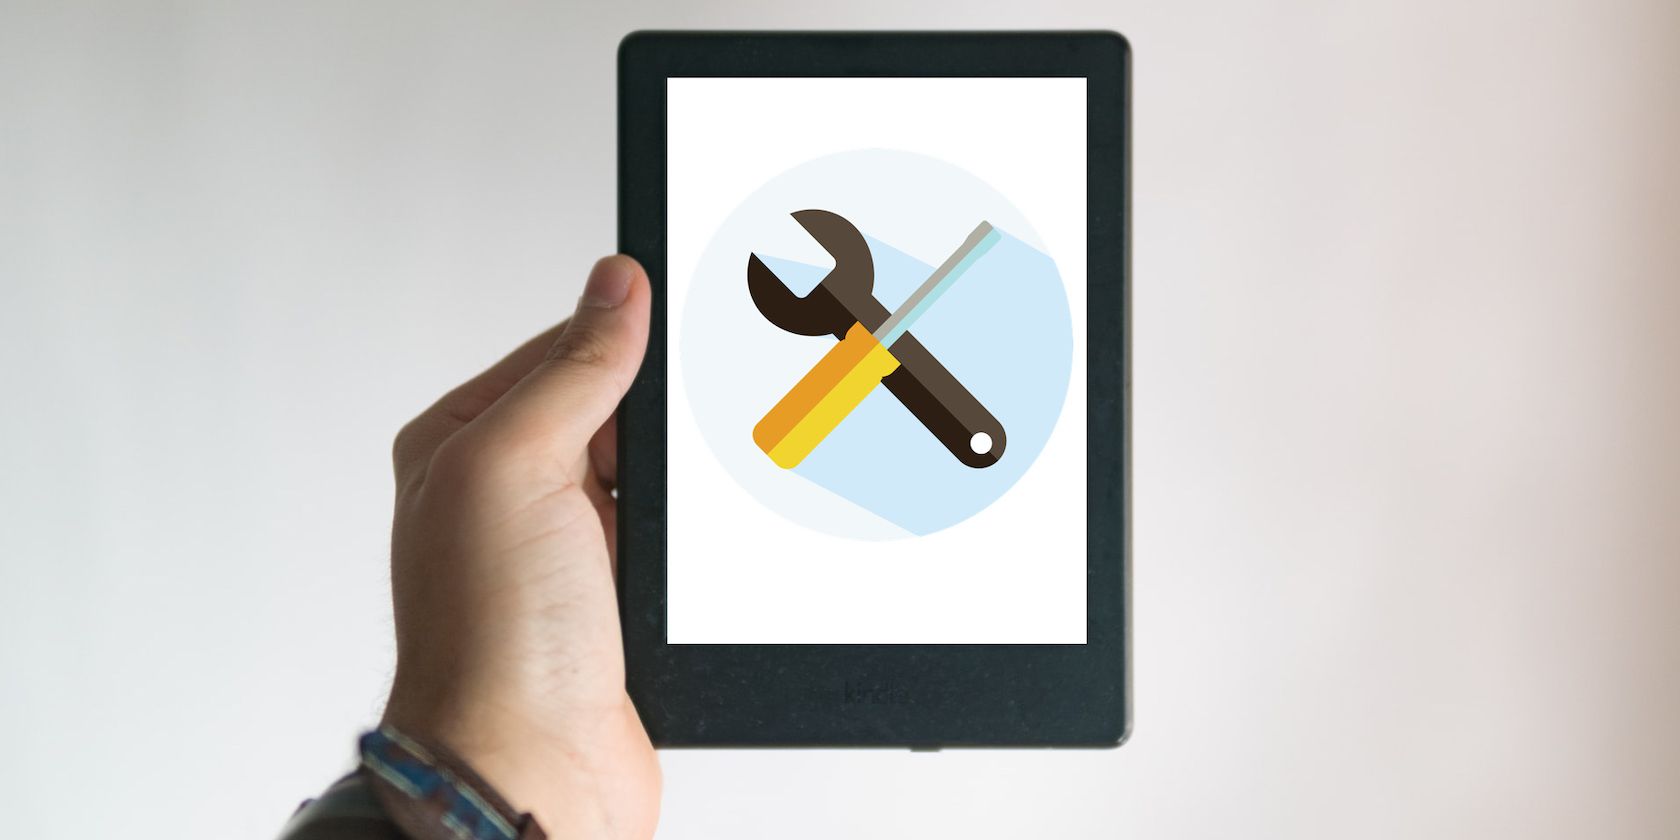 A close up of a hand holding up a Kindle with a screwdriver and cogwheel logo overlaid